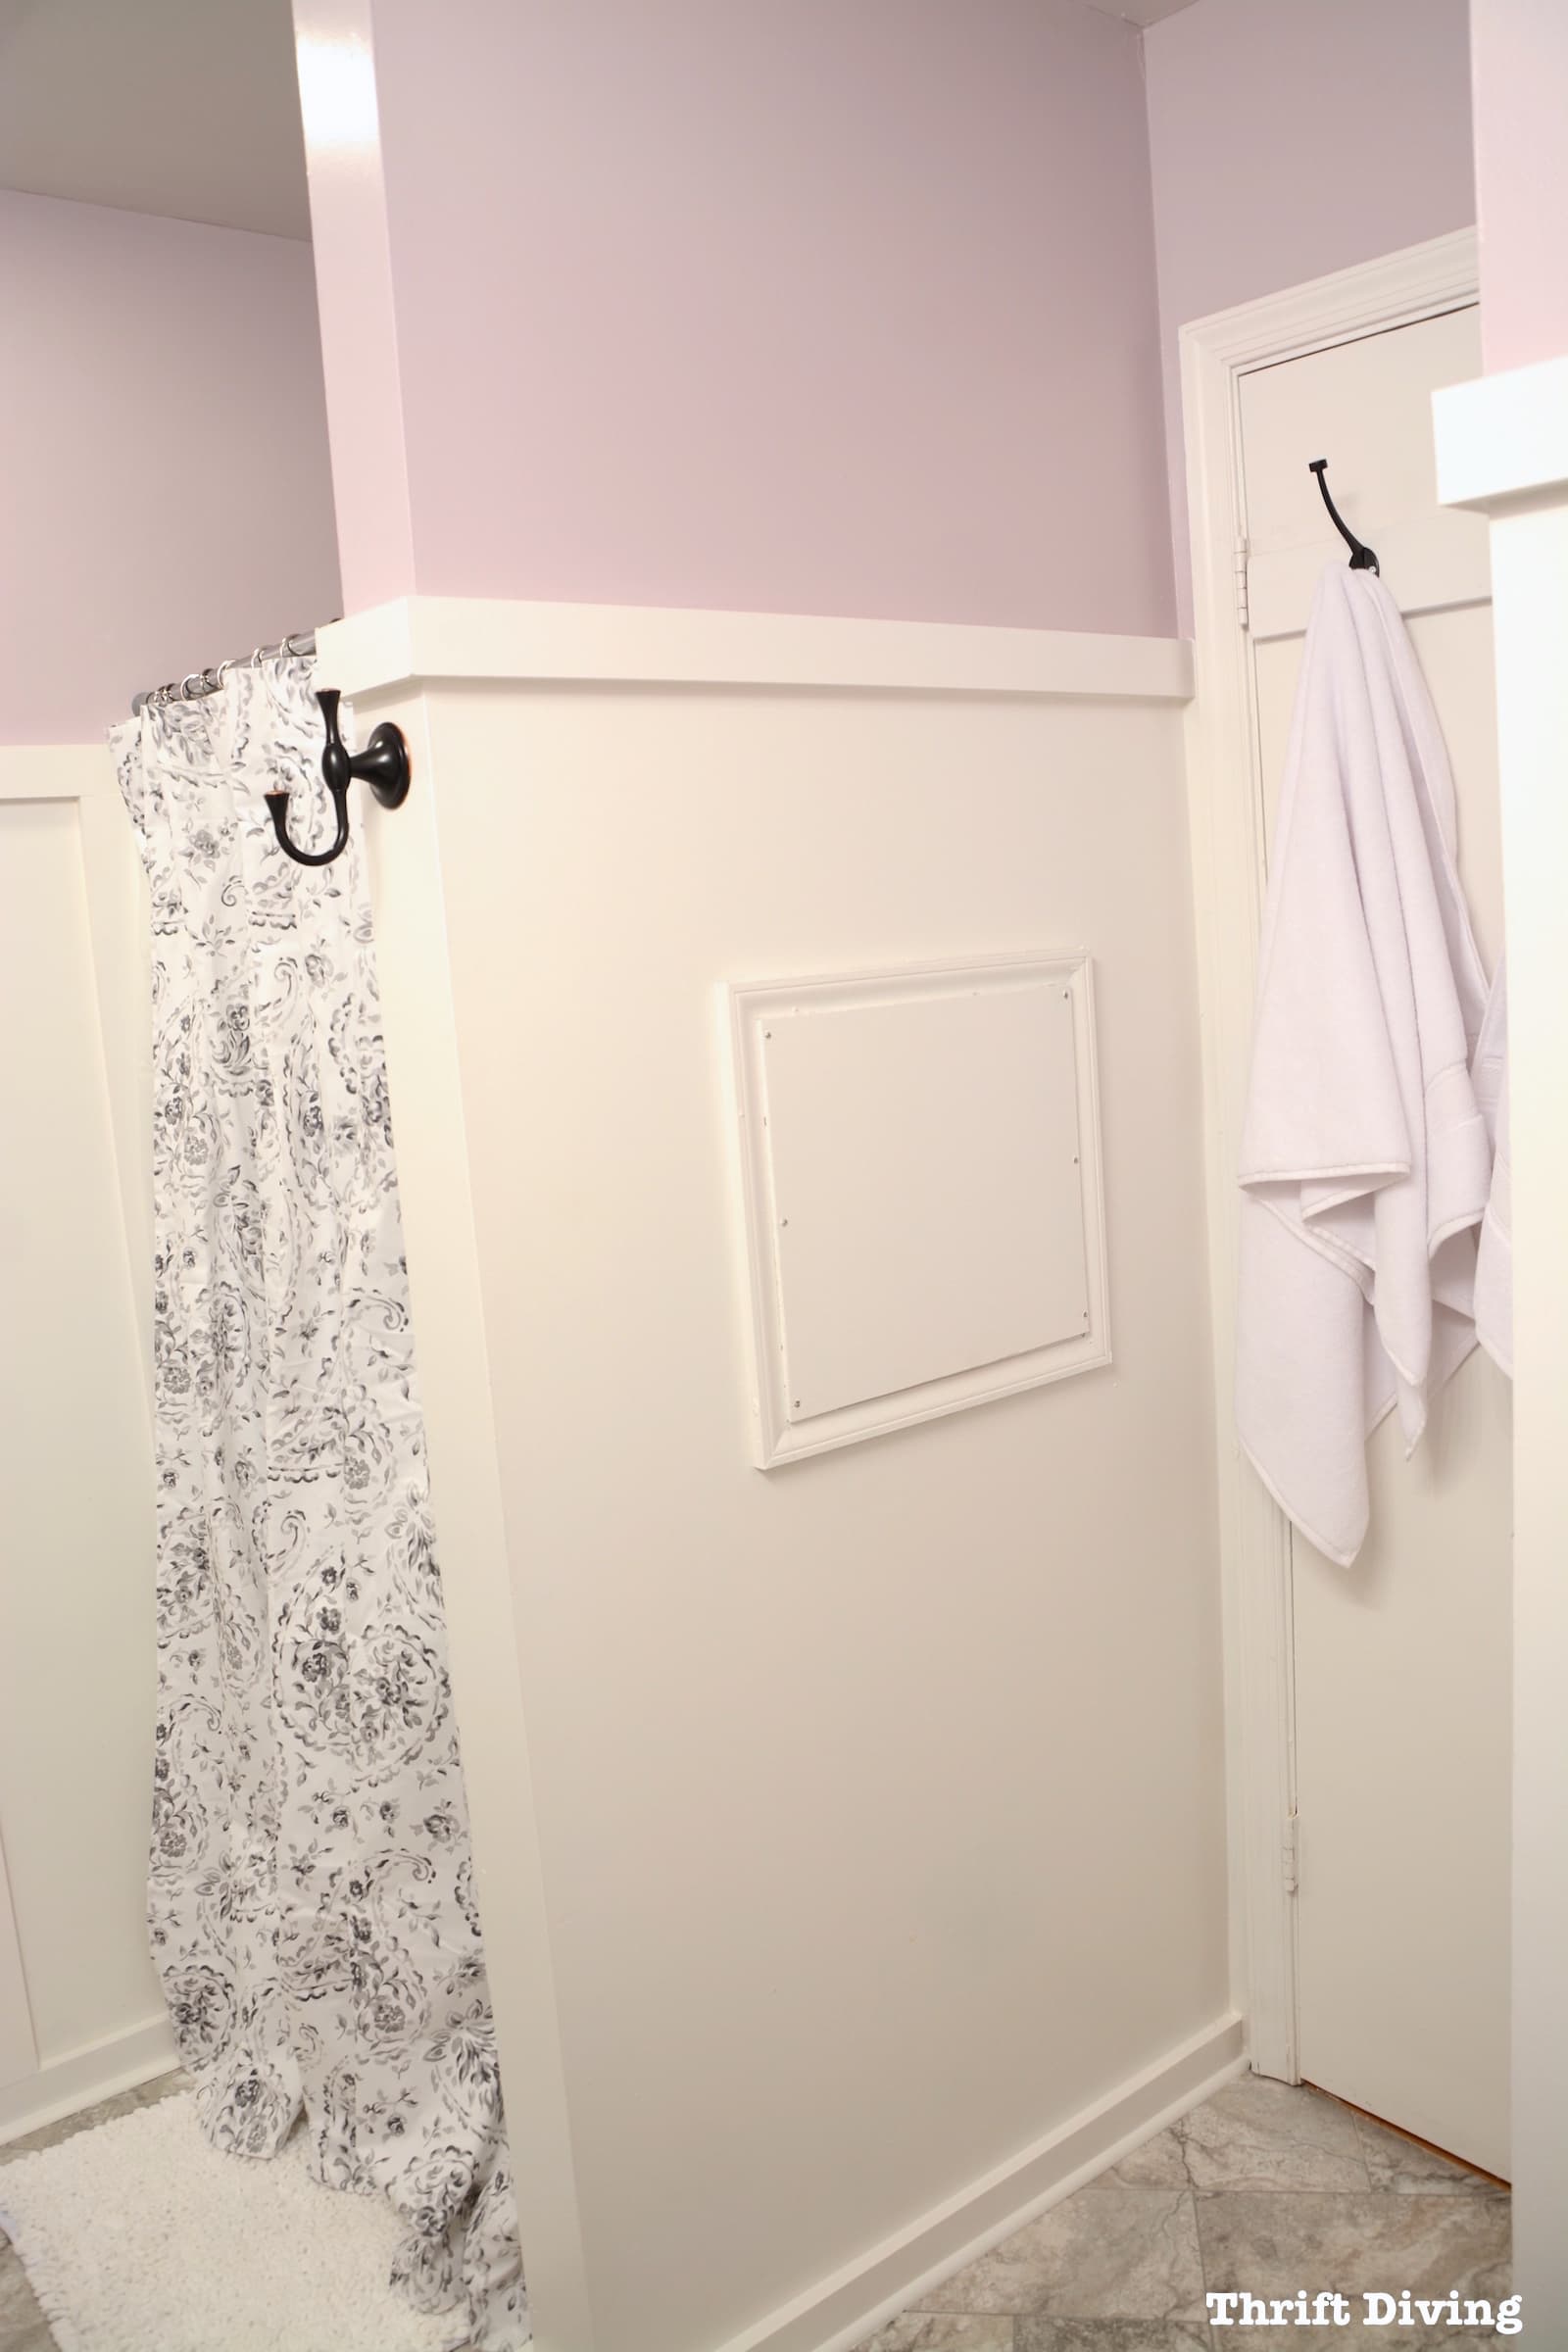 Pretty lavender master bathroom makeover - Behr Mulberry Stain wall color and painted shower. - Thrift Diving